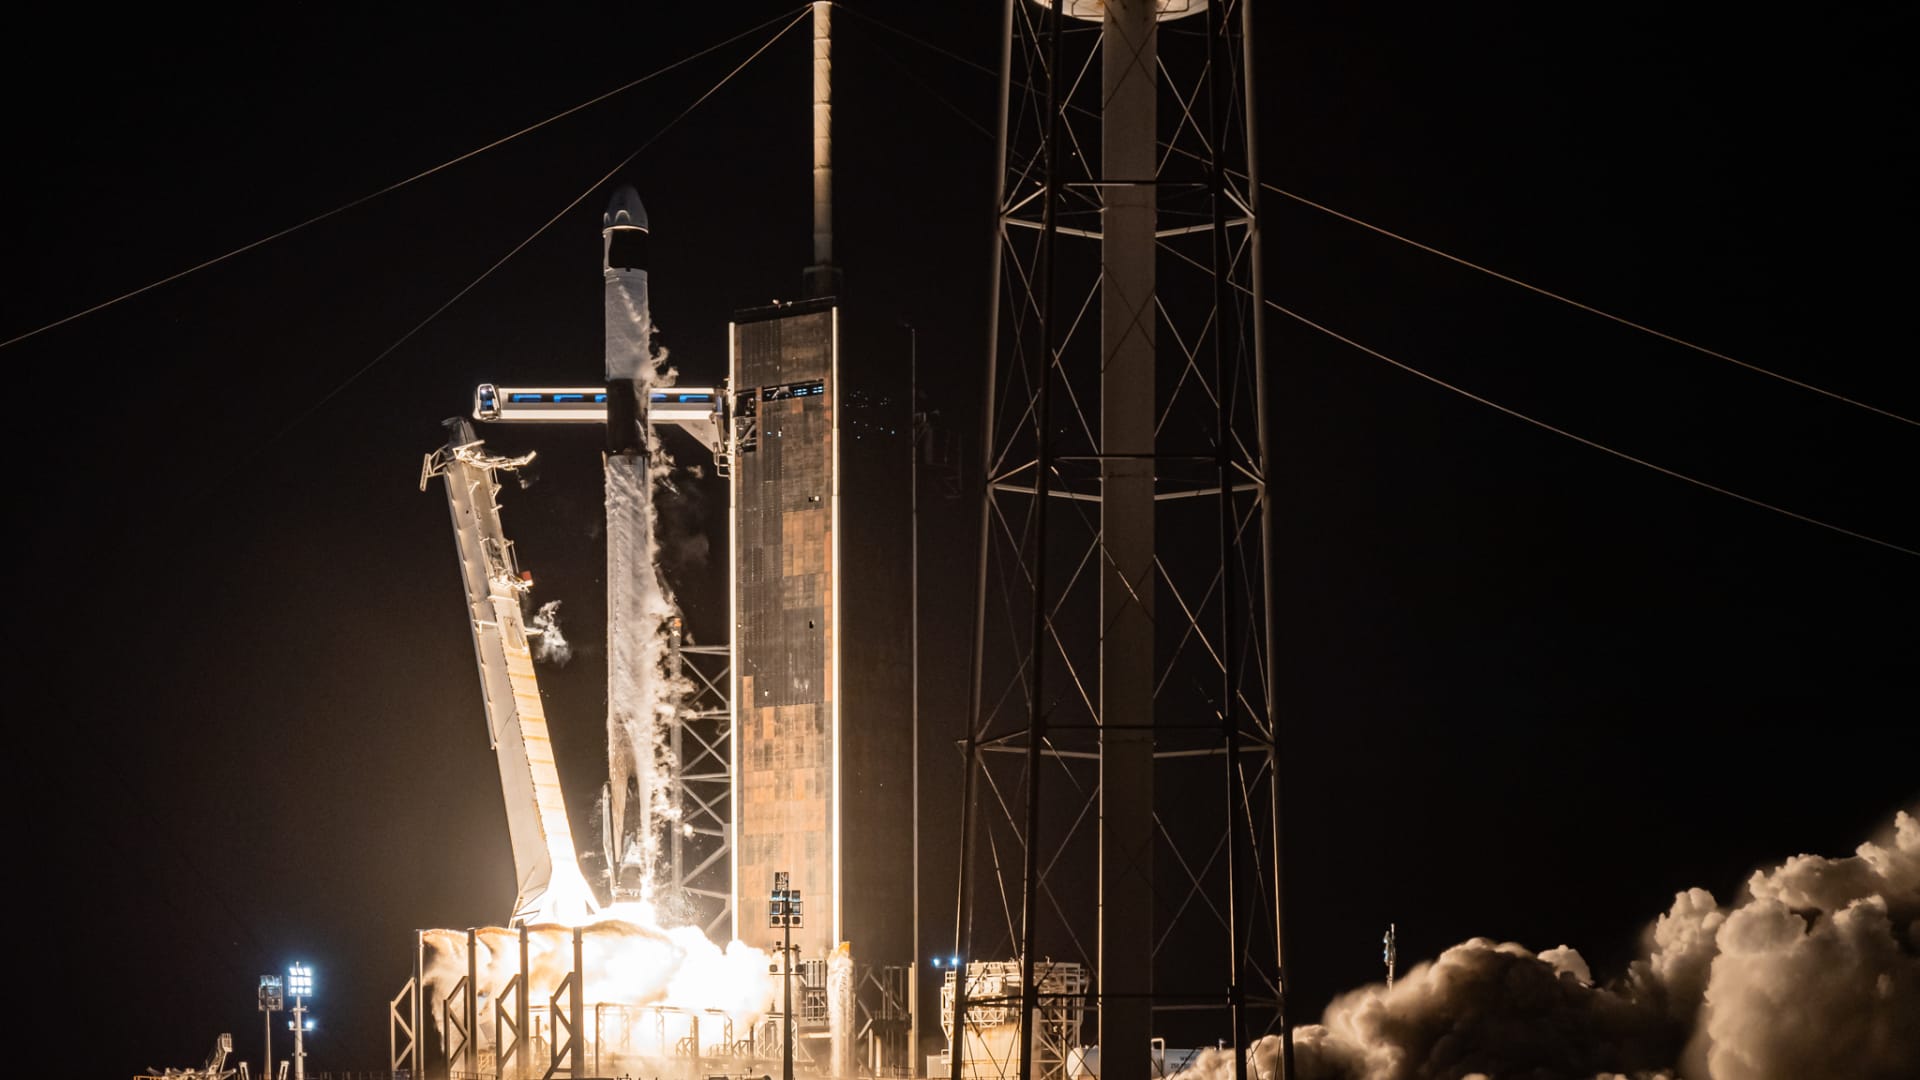 SpaceX's Falcon 9 rocket lifts off carrying Crew Dragon spacecraft Resilience on September 15, 2021.